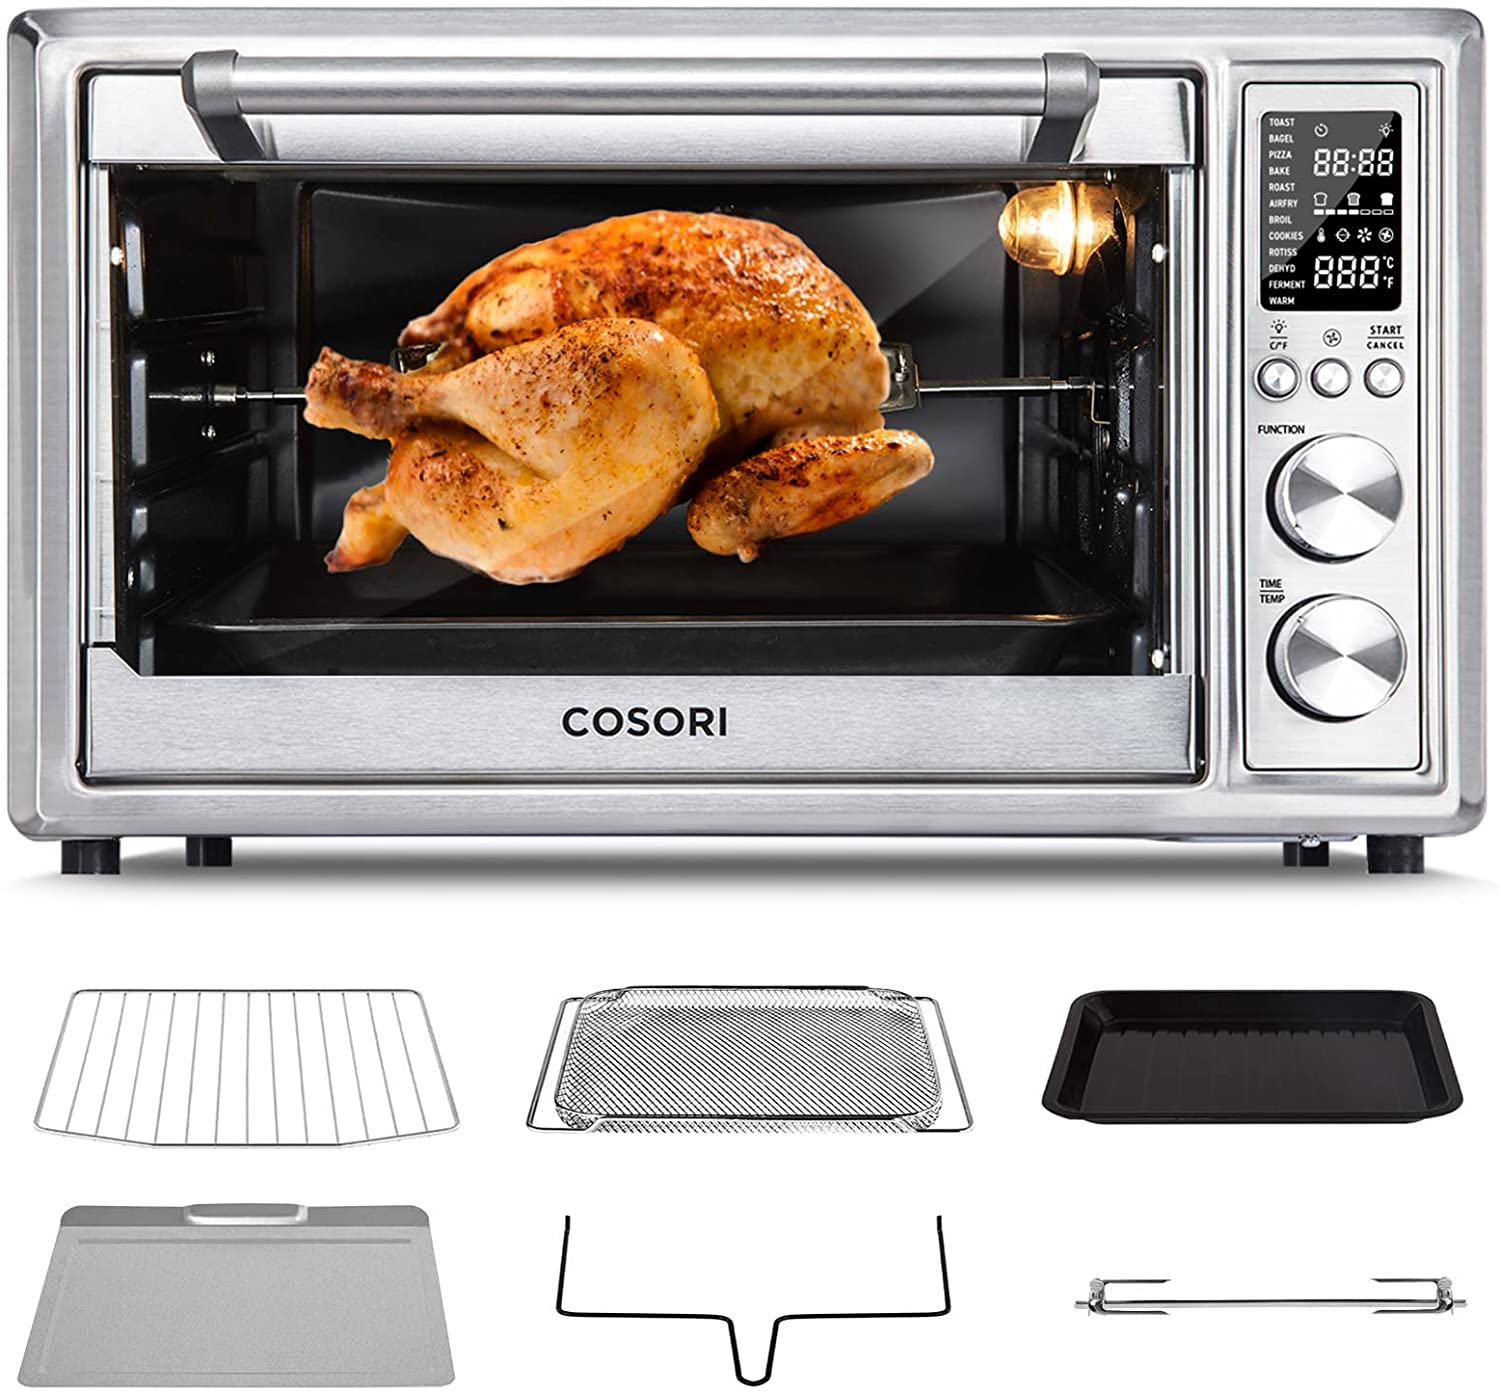 COSORI CO130-AO Countertop Air Fryer Toaster Oven with Rotisserie and Dehydrator